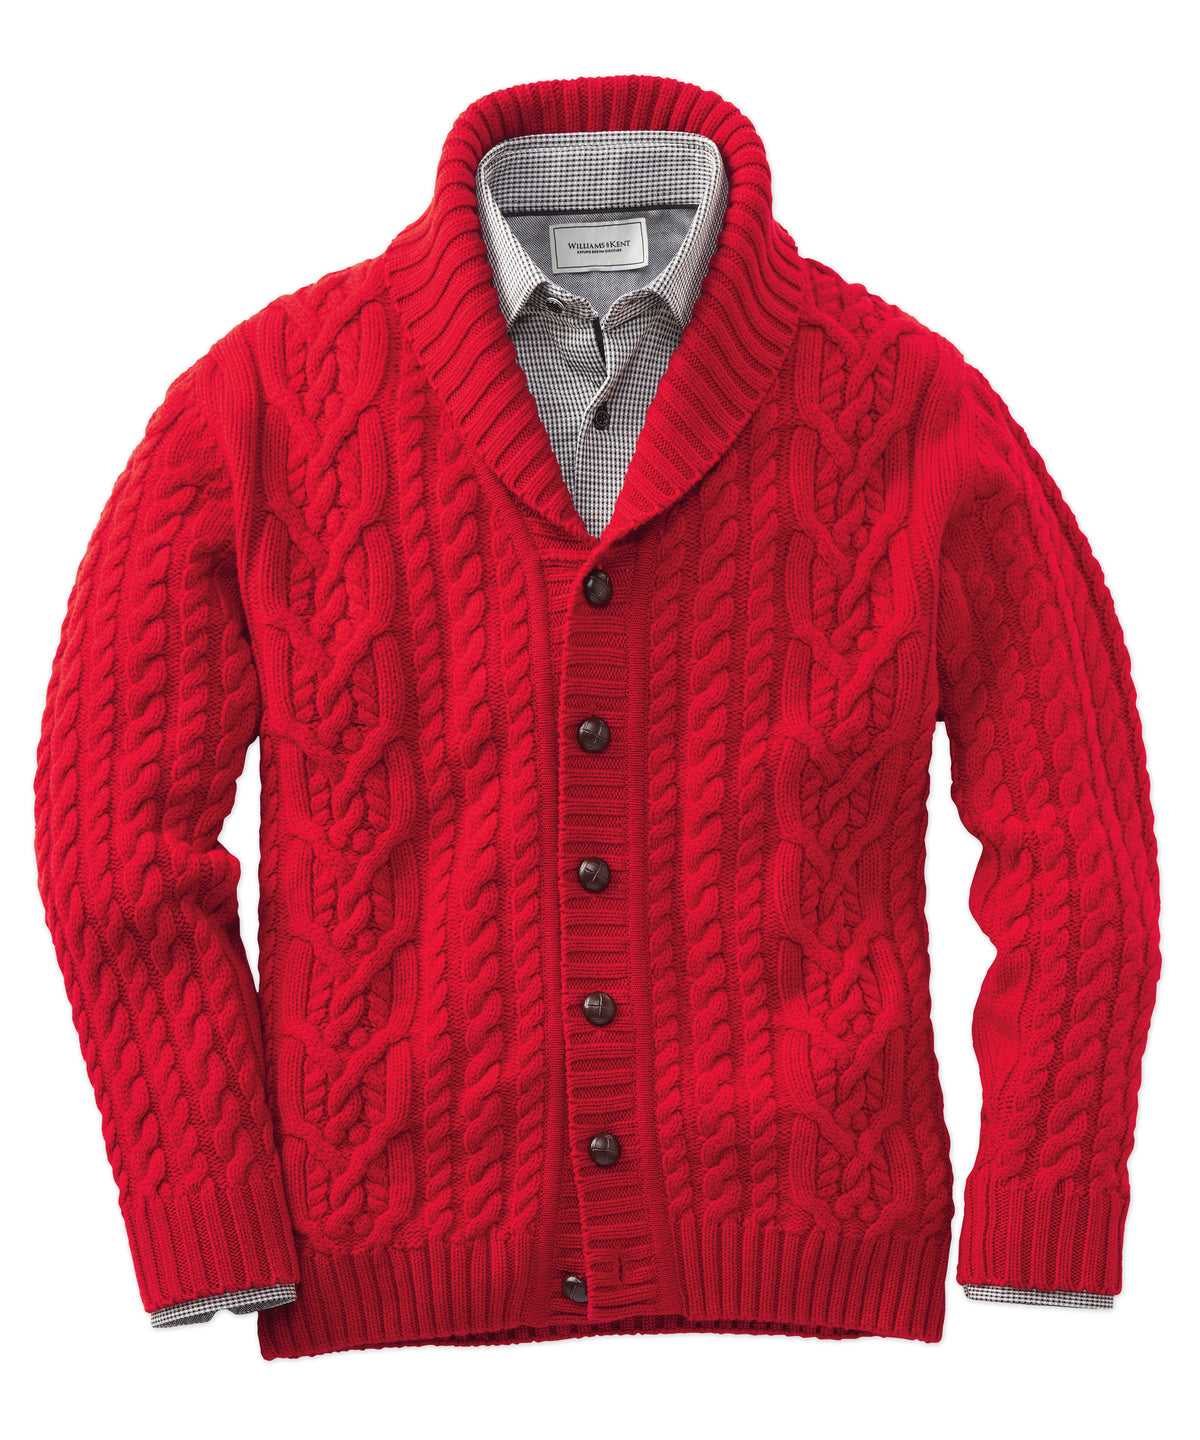 Johnstons of Elgin Red Cashmere Cable Shawl Cardigan